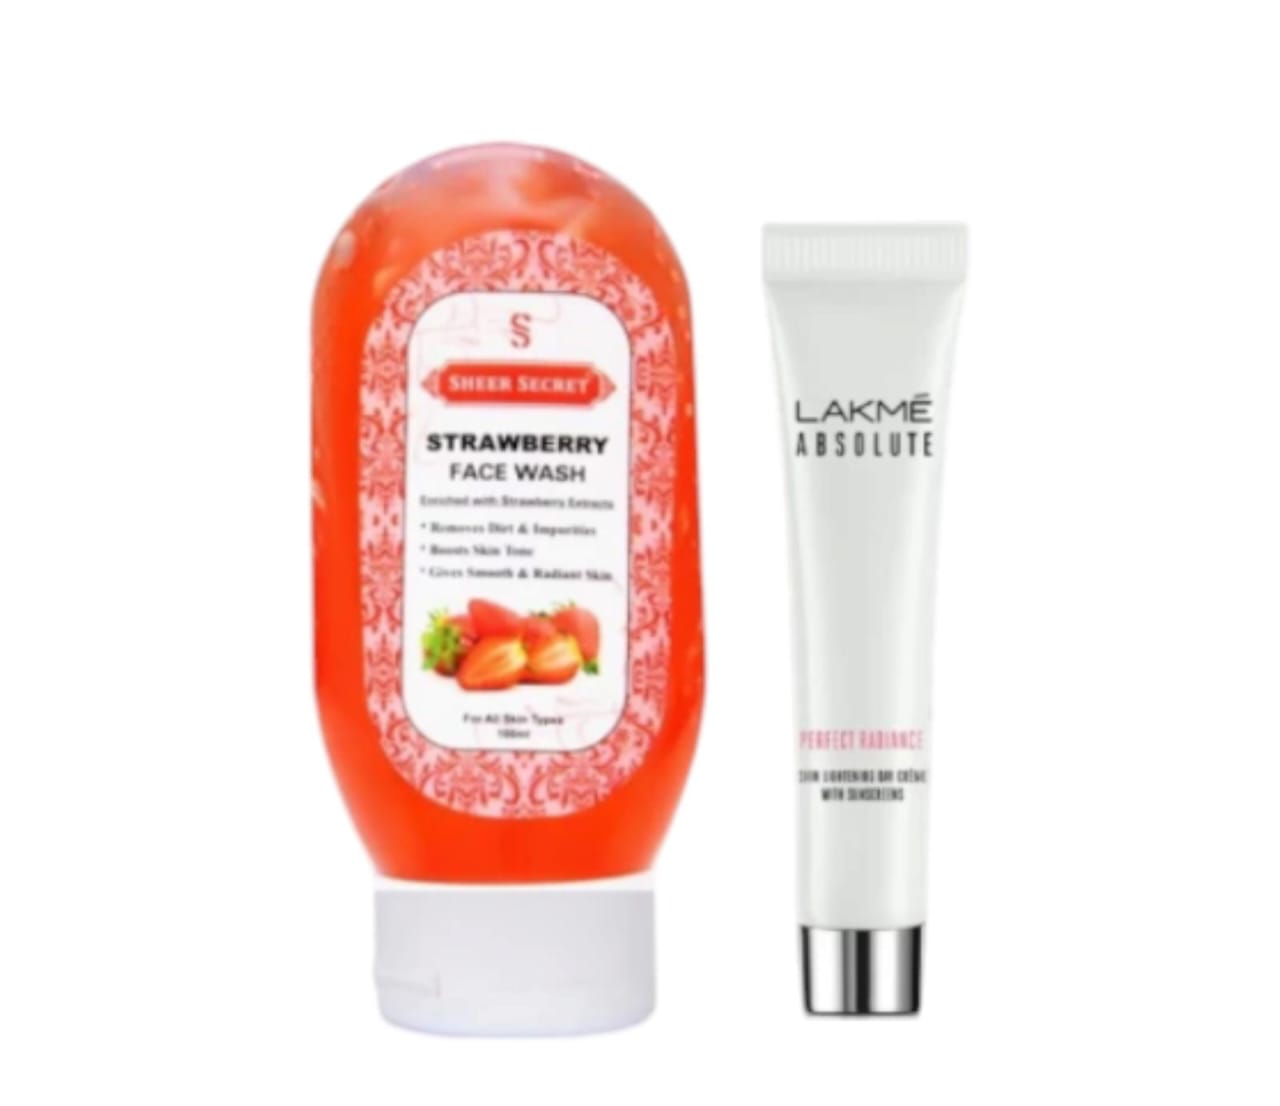 Lakme Sheer Secret Strawberry Face Wash and Absolute Perfect Radiance Skin Lightening Day Creme